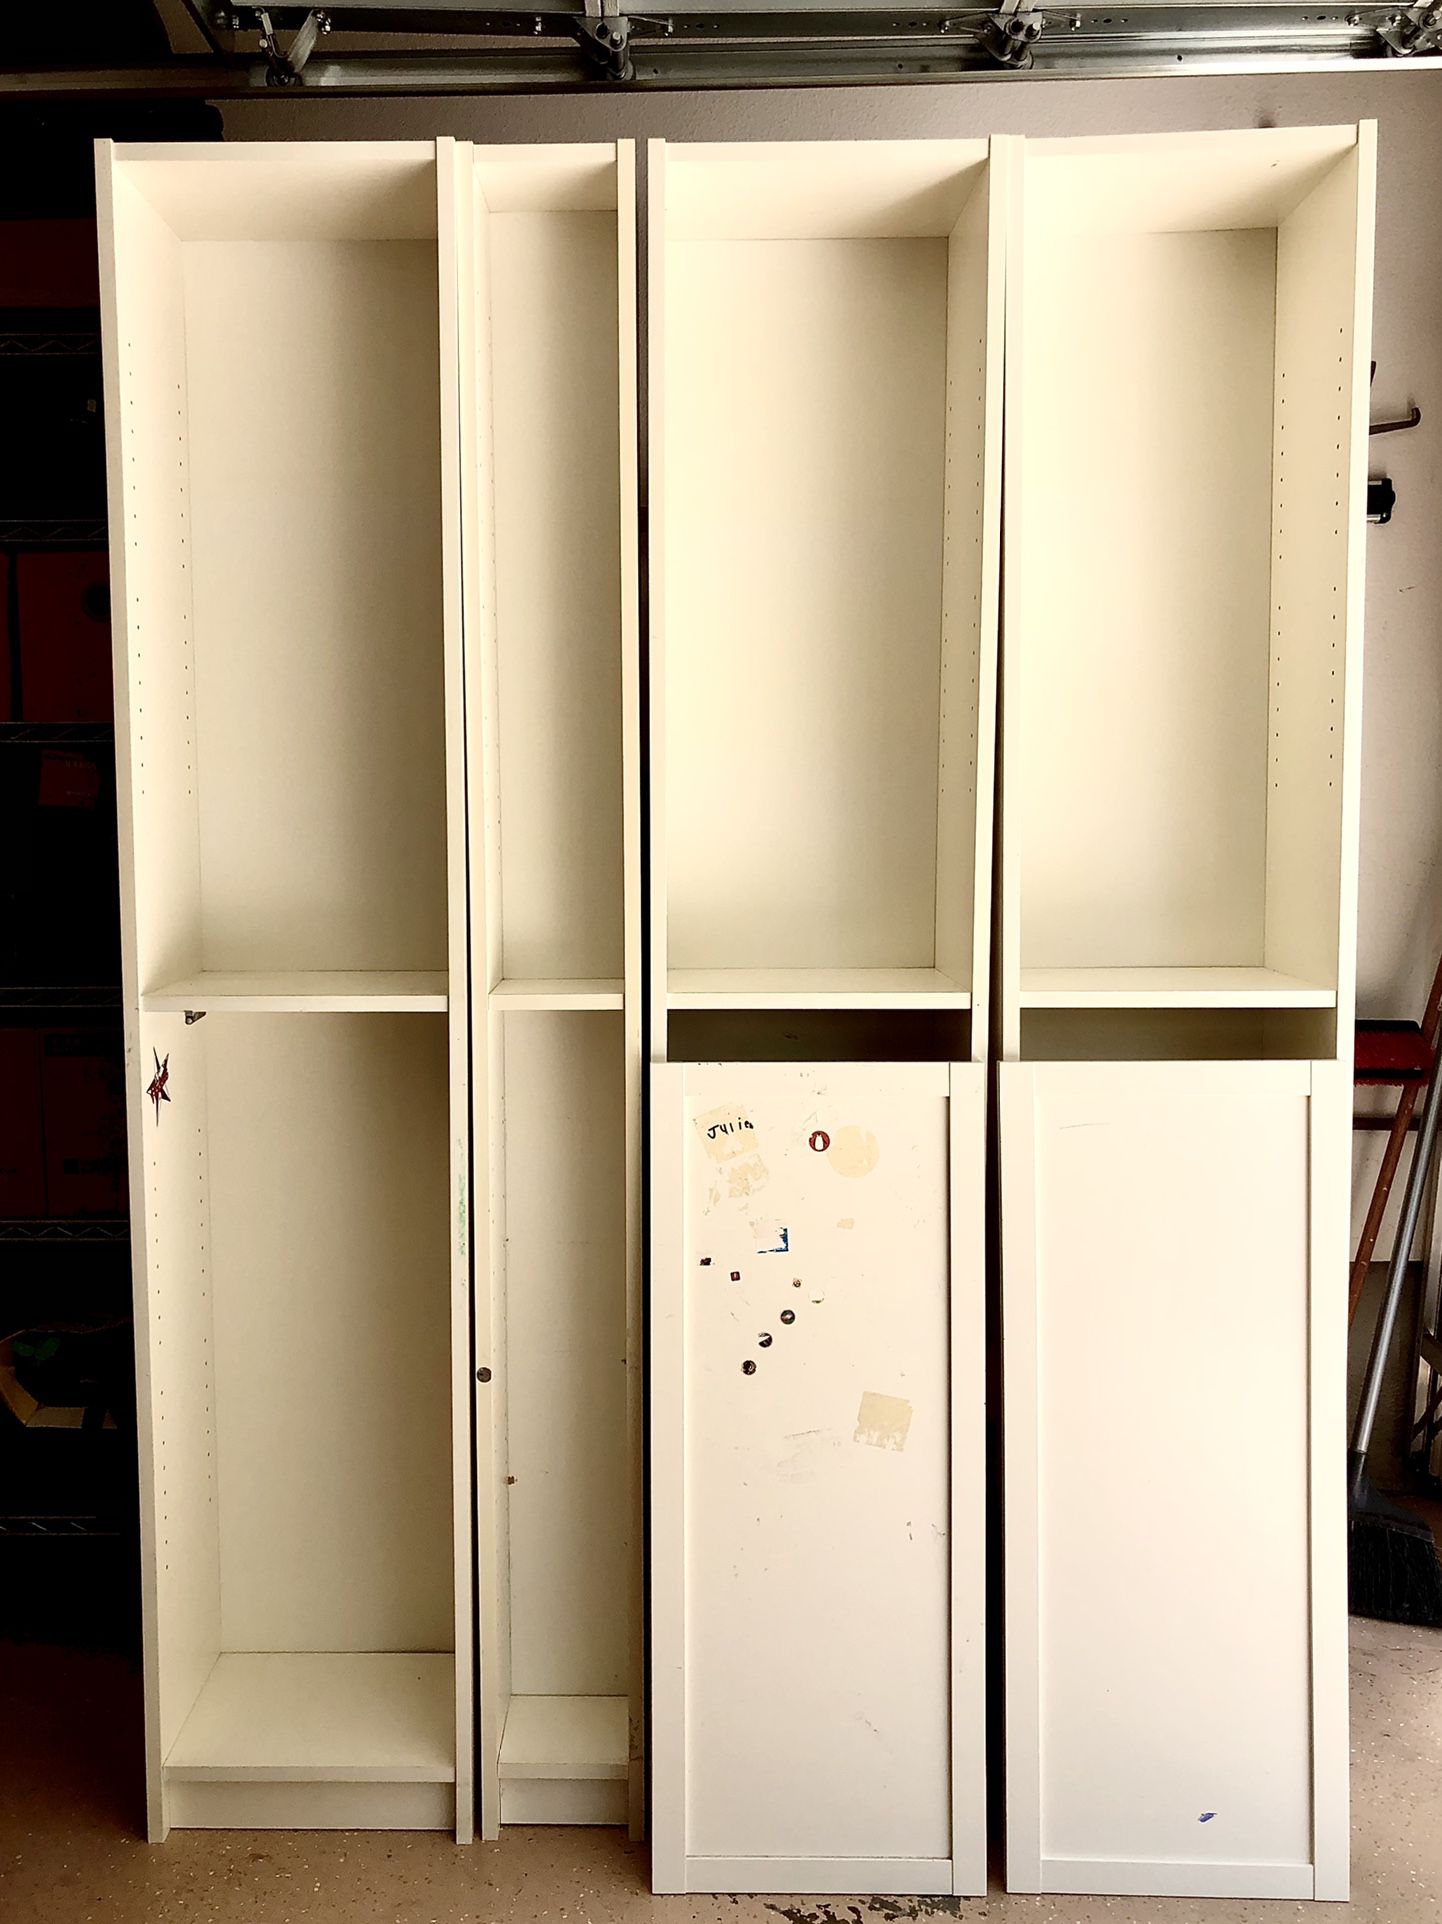 *REDUCED PrICE* $65- Ikea White Billy Bookcase Unit